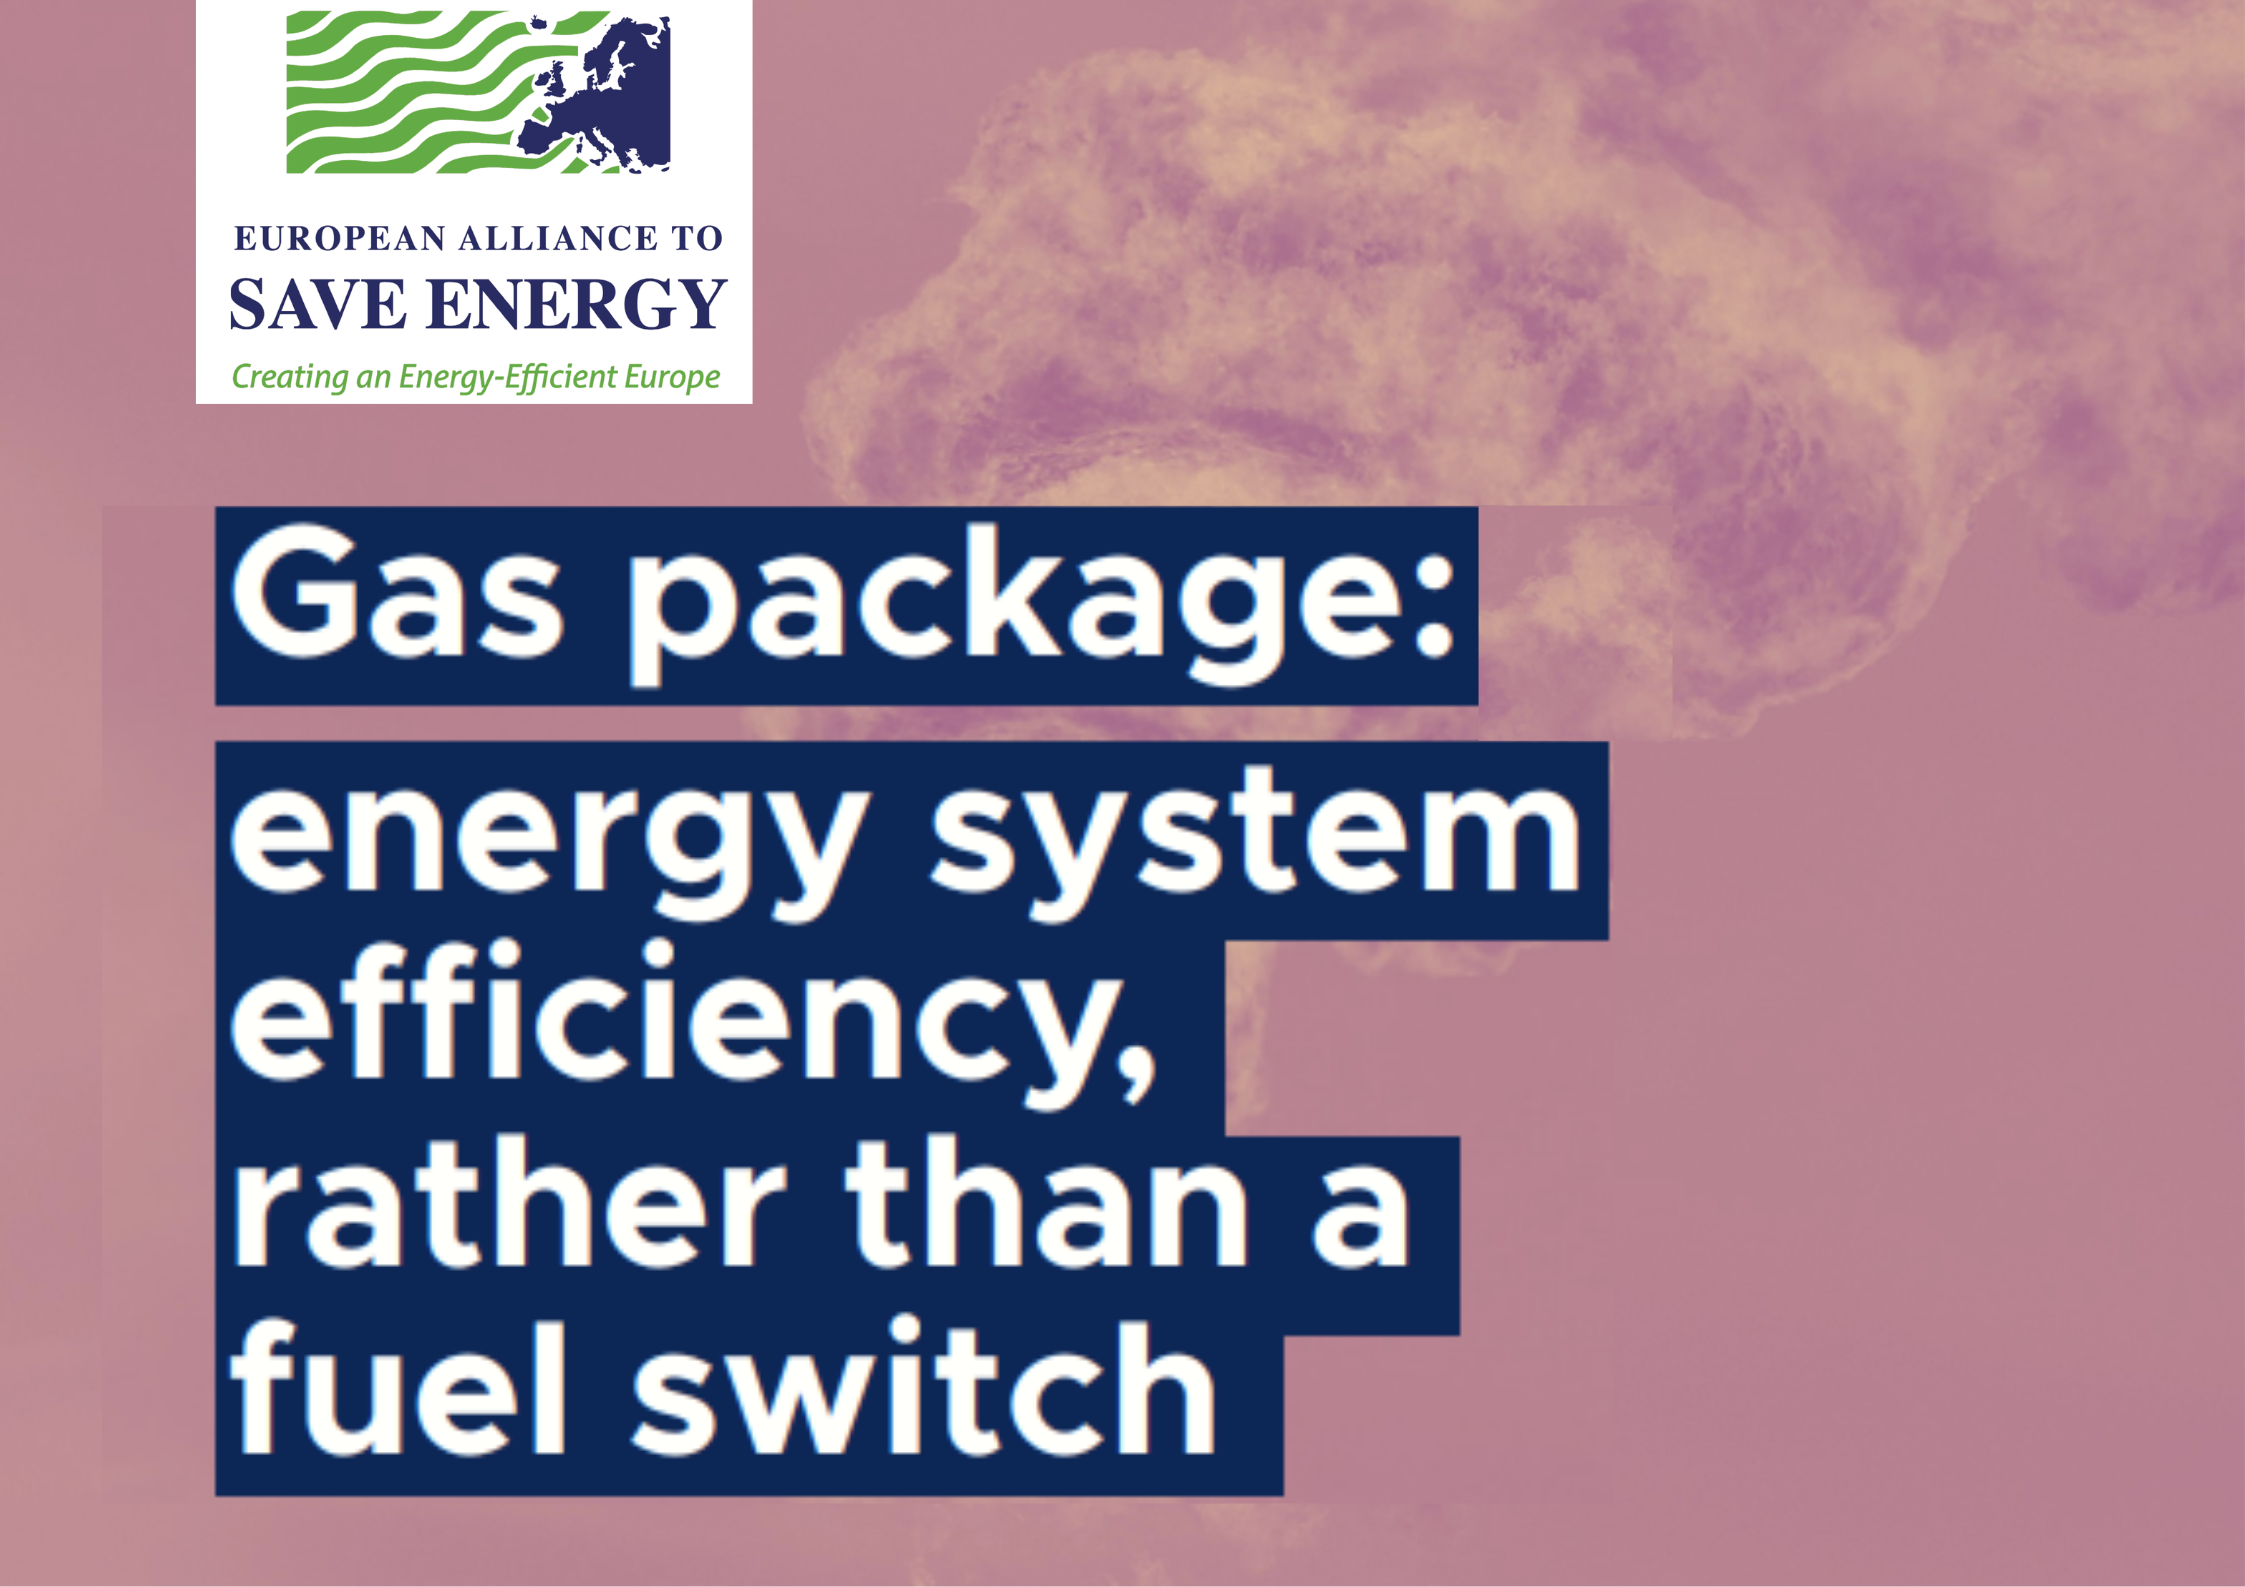 Gas package: energy system efficiency, rather than a fuel switch